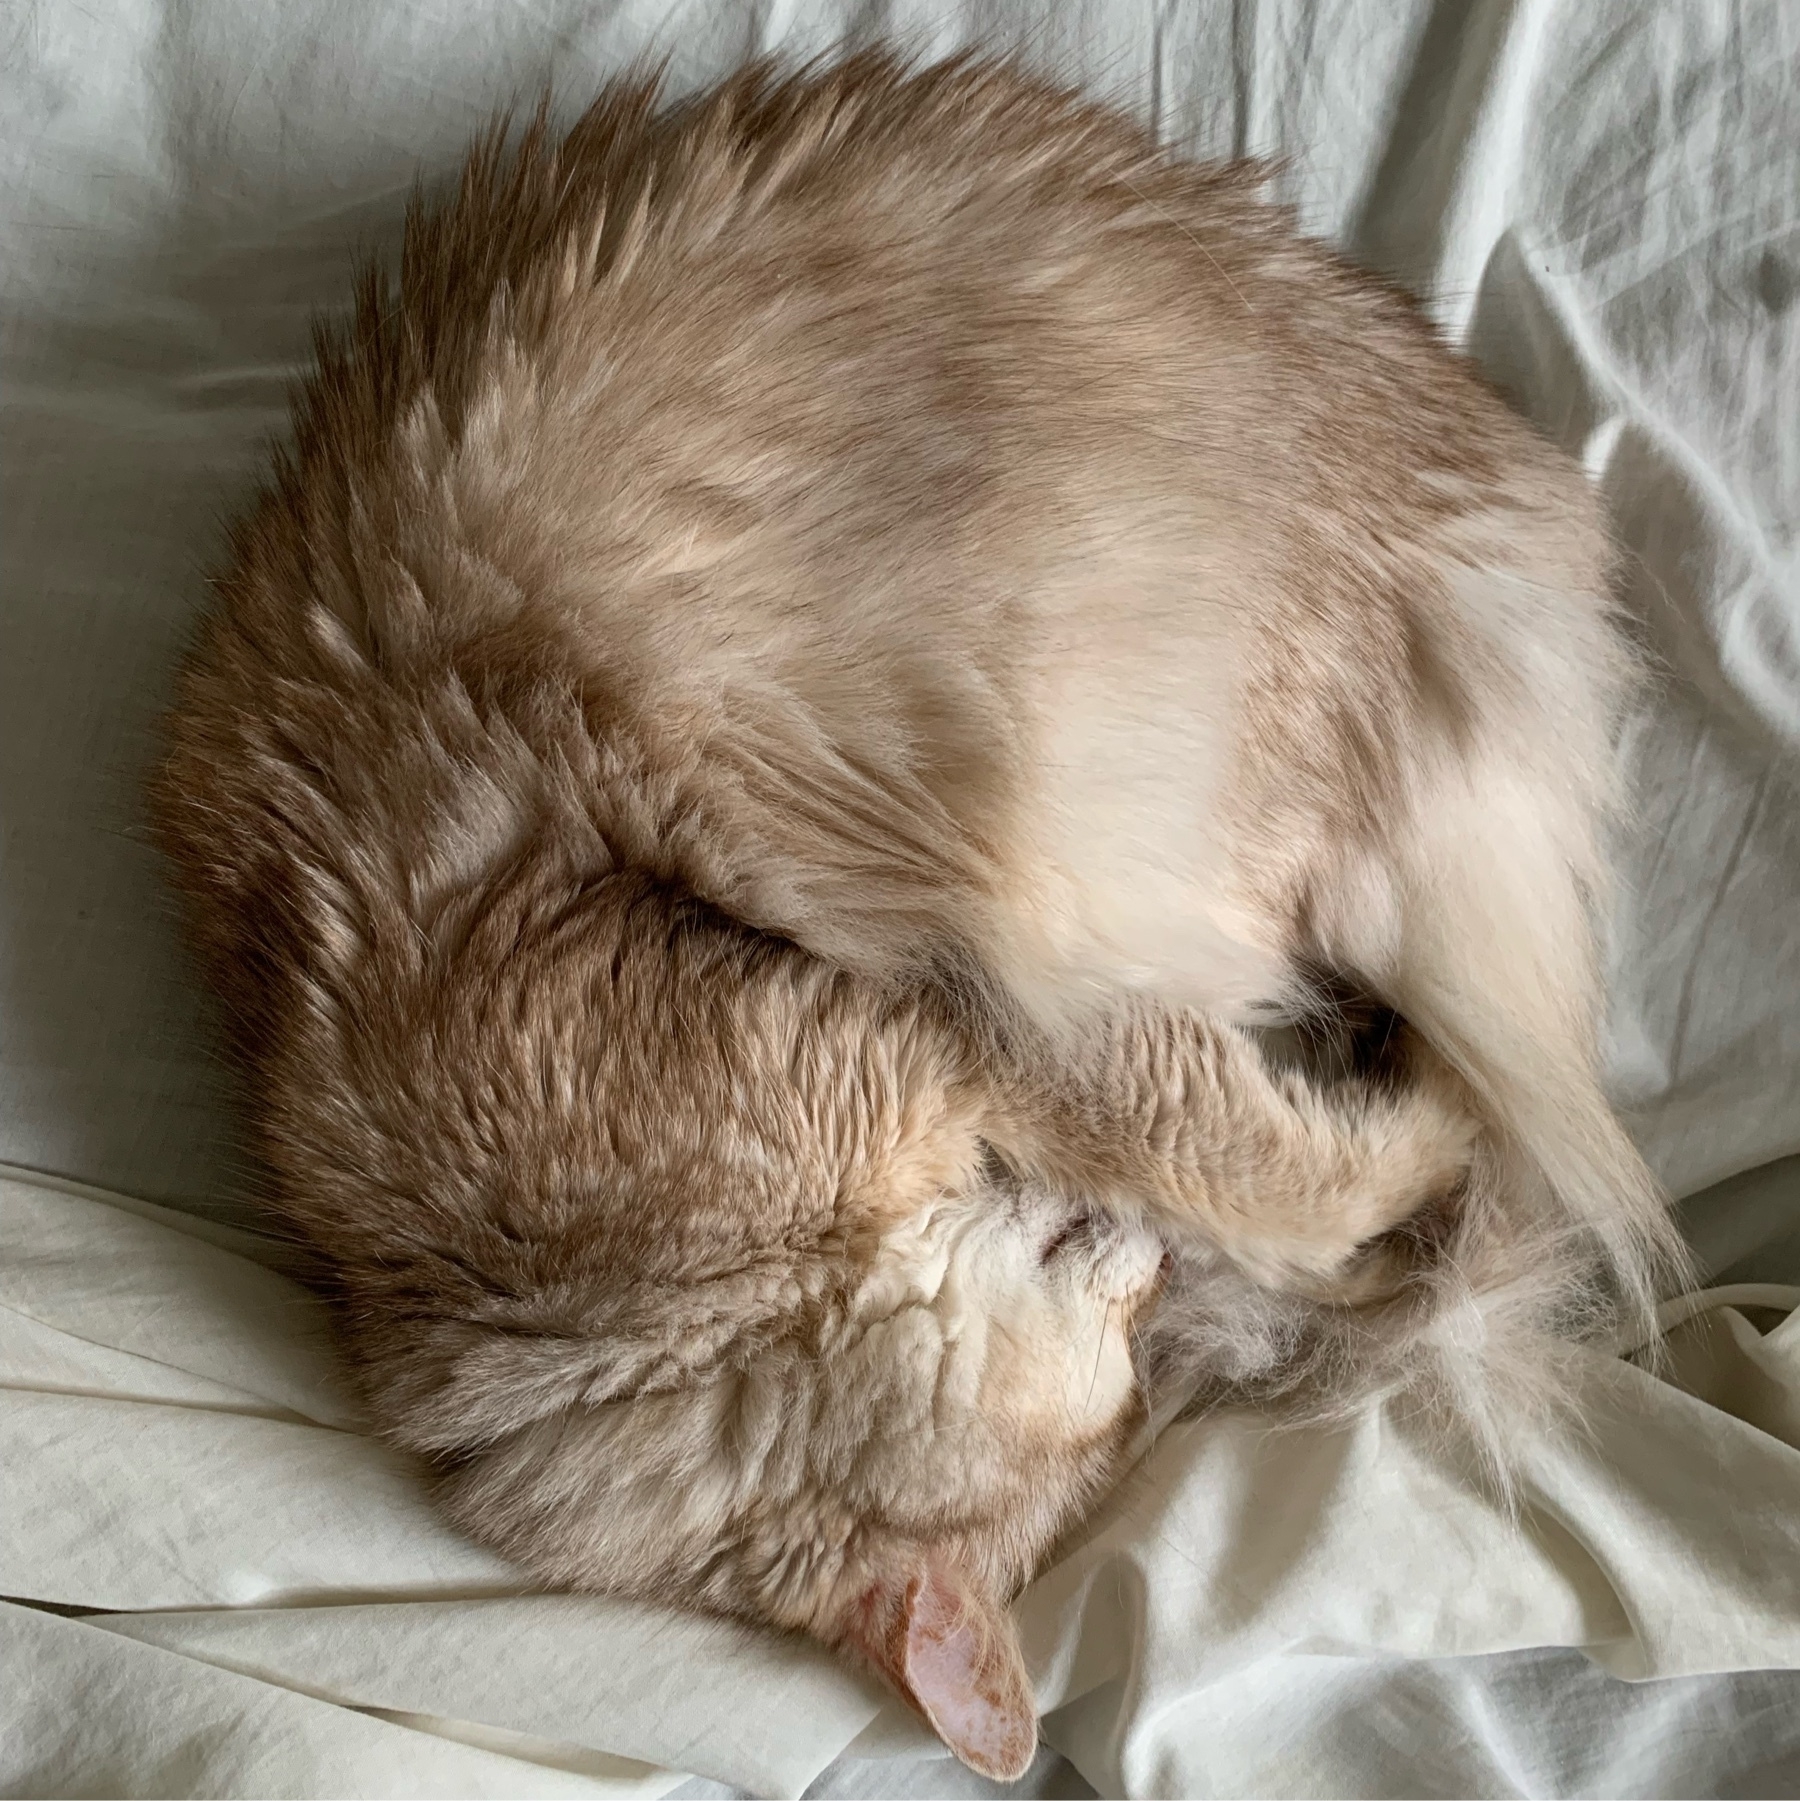 A long haired caramel coloured cat is sleeping curled up in a ball